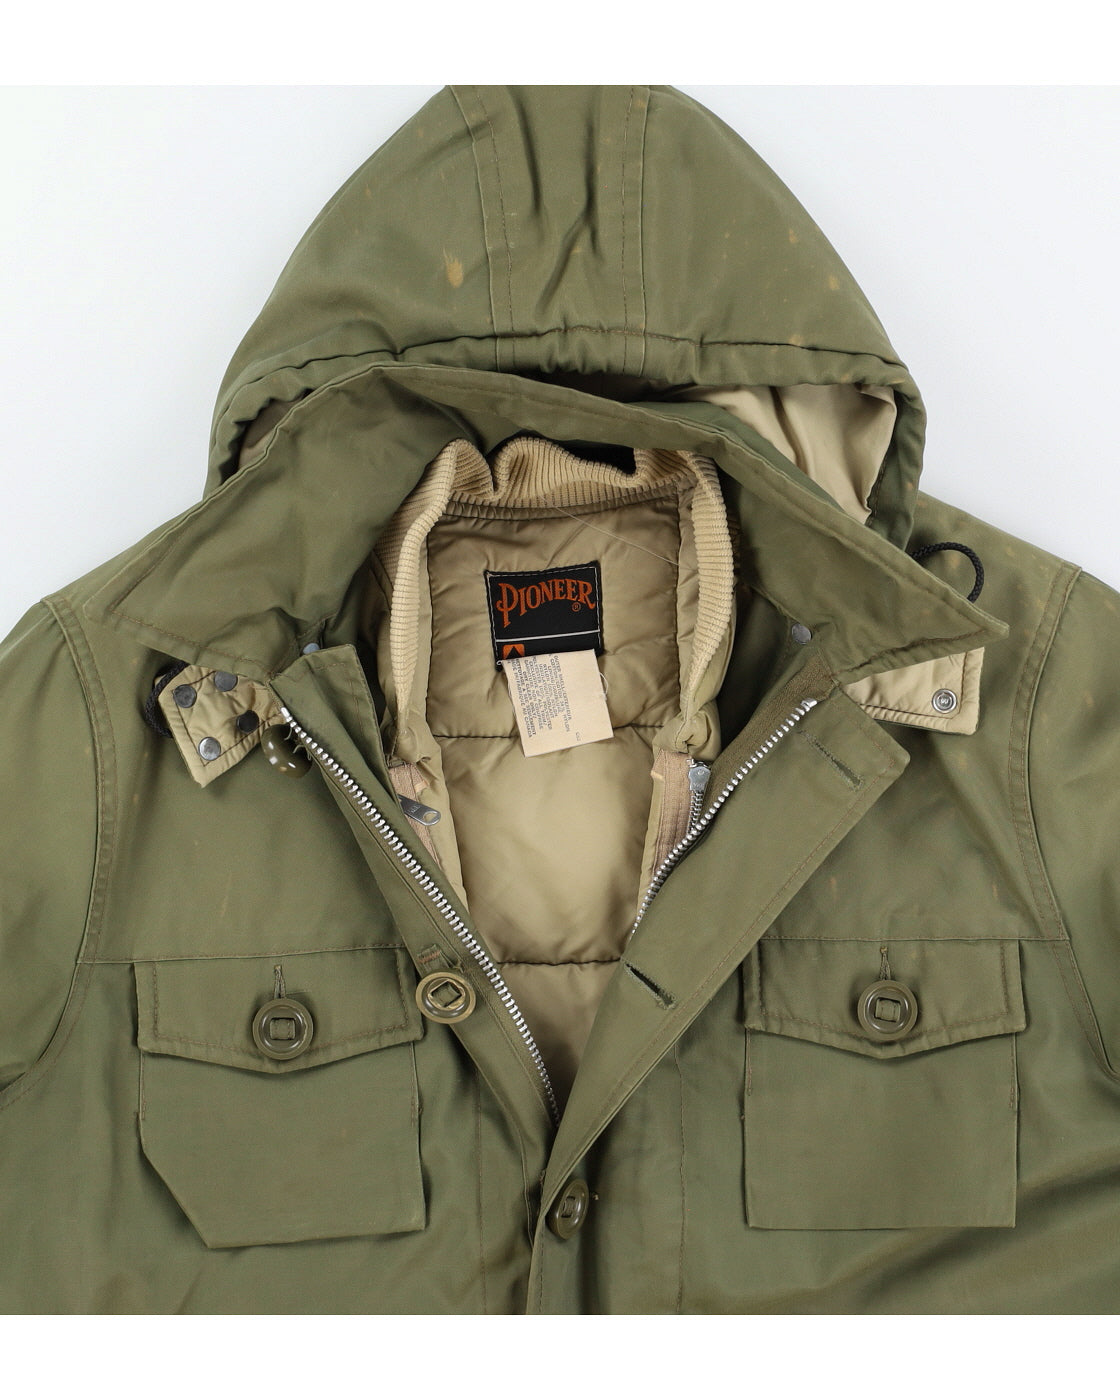 70s Canadian Outdoors/Hunting Parka & Liner - XL